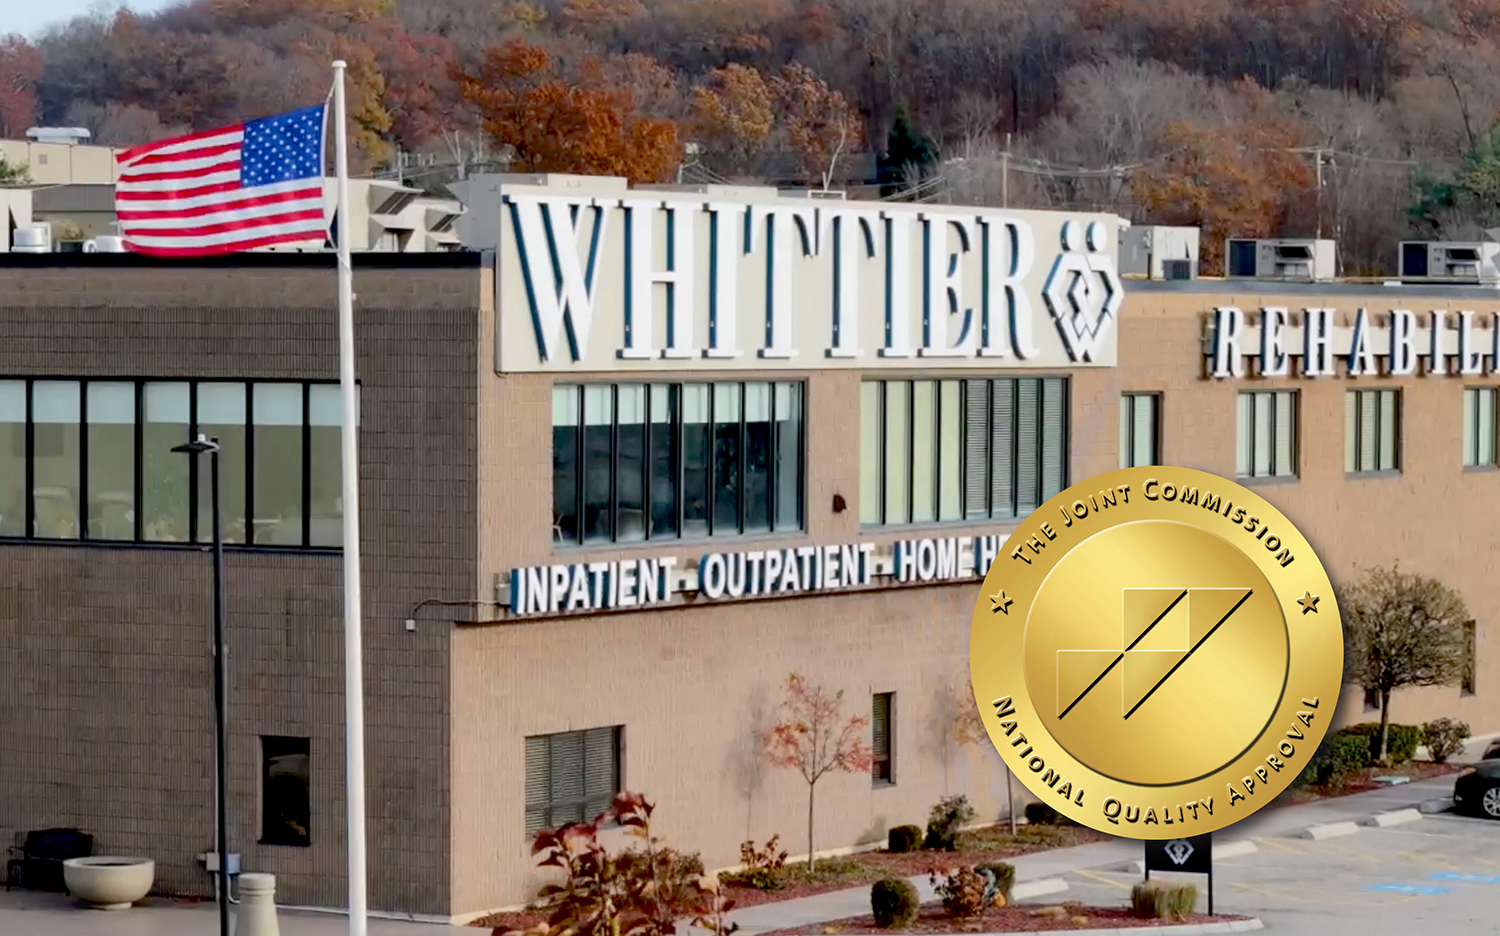 Whittier Rehabilitation Hospital-Bradford has been awarded Recertification in Pulmonary and Stroke Rehabilitation by The Joint Commission.